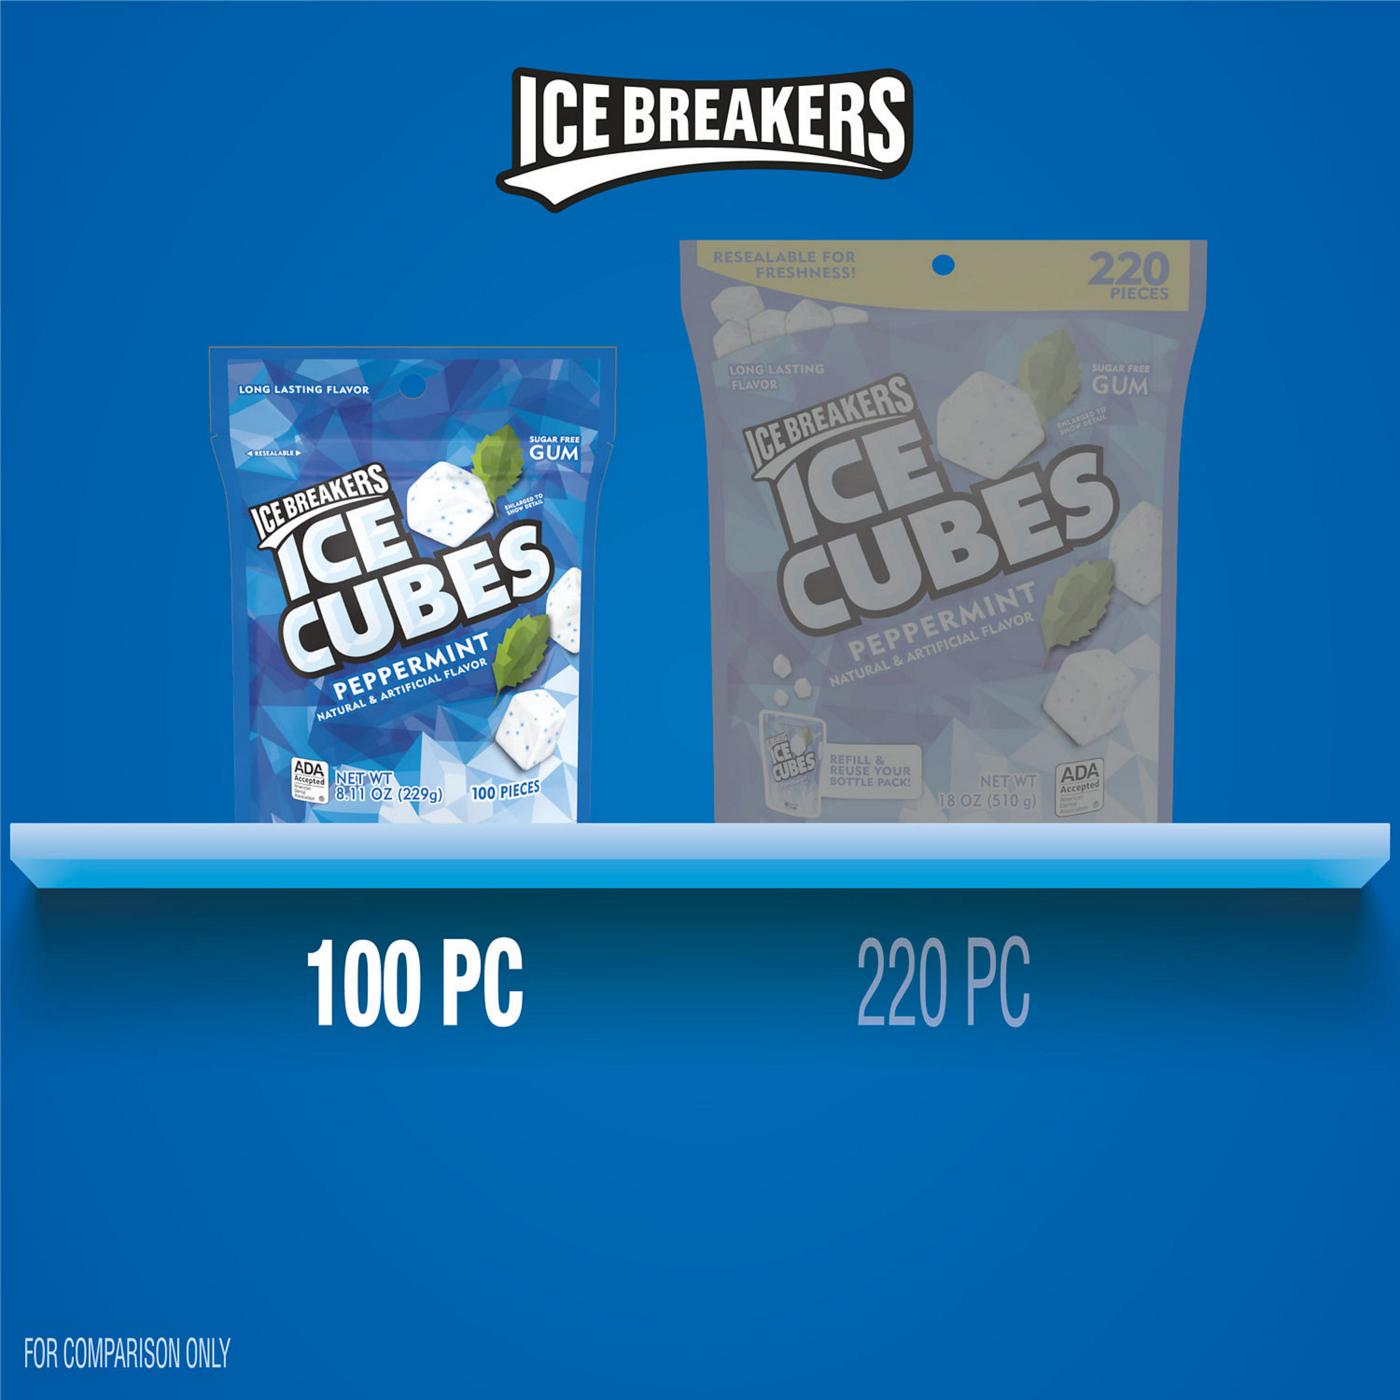 Ice Breakers Ice Cubes Peppermint Sugar Free Chewing Gum; image 2 of 7